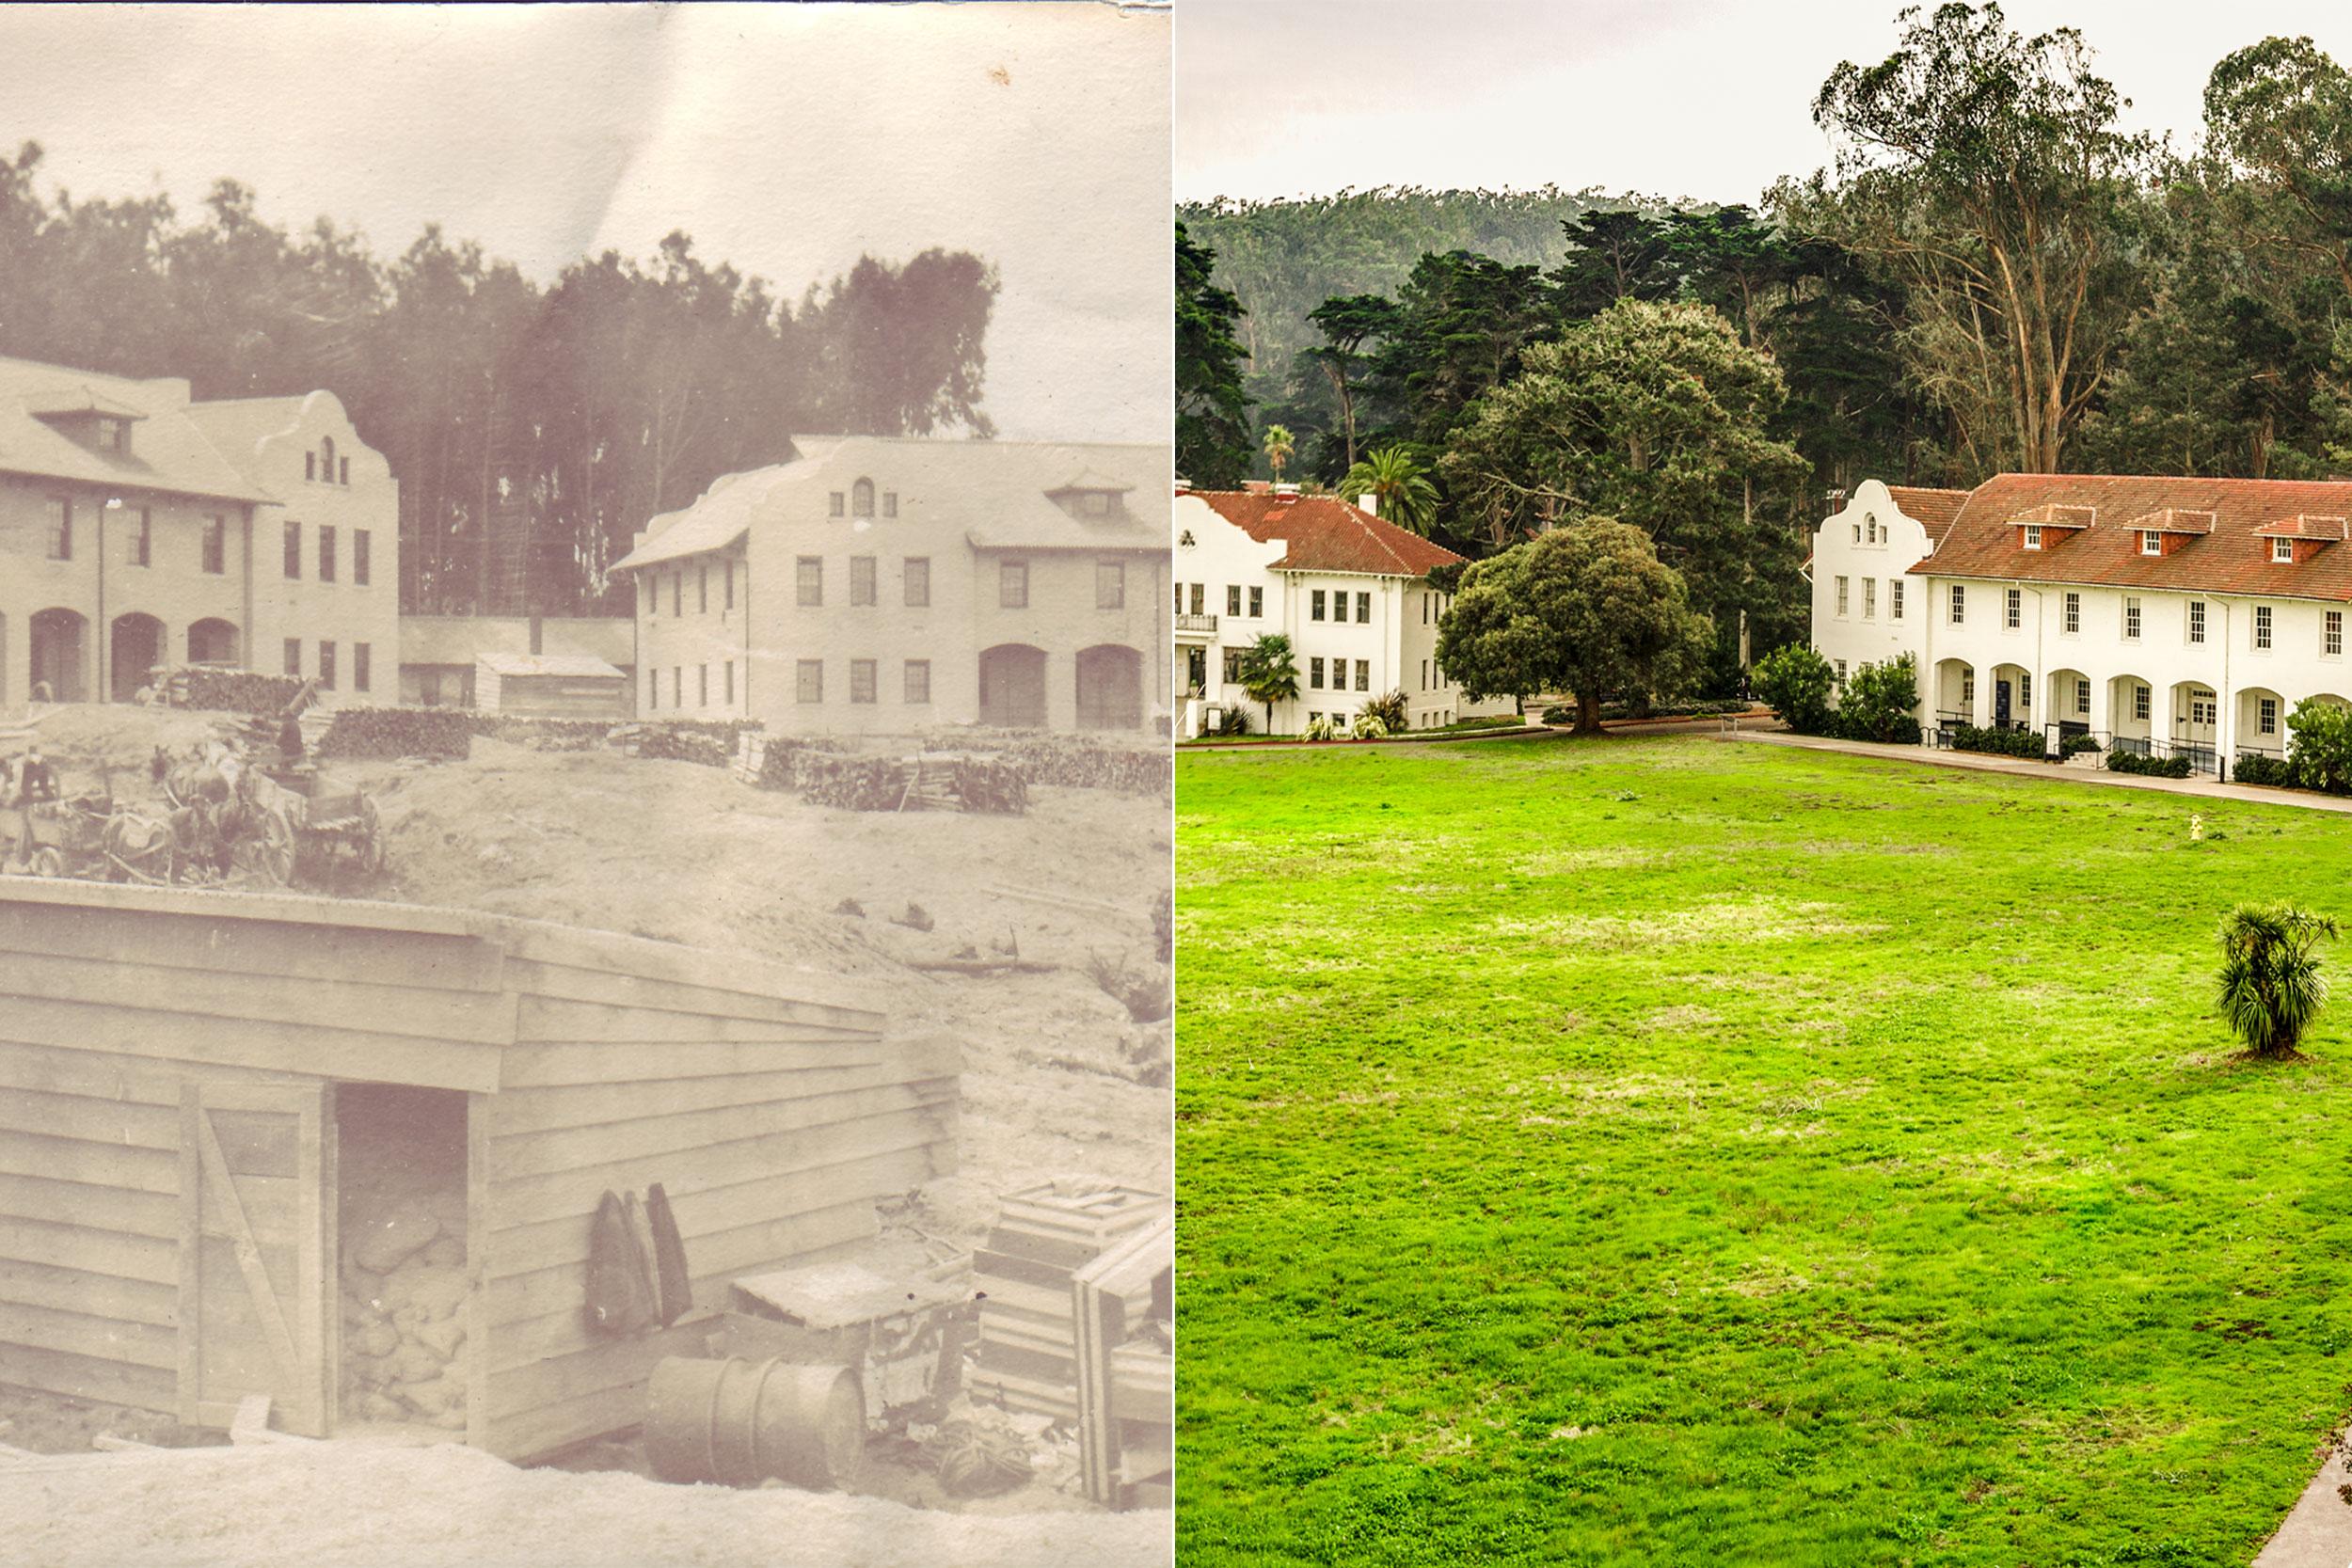 Fort Winfield Scott buildings in 1911 and present